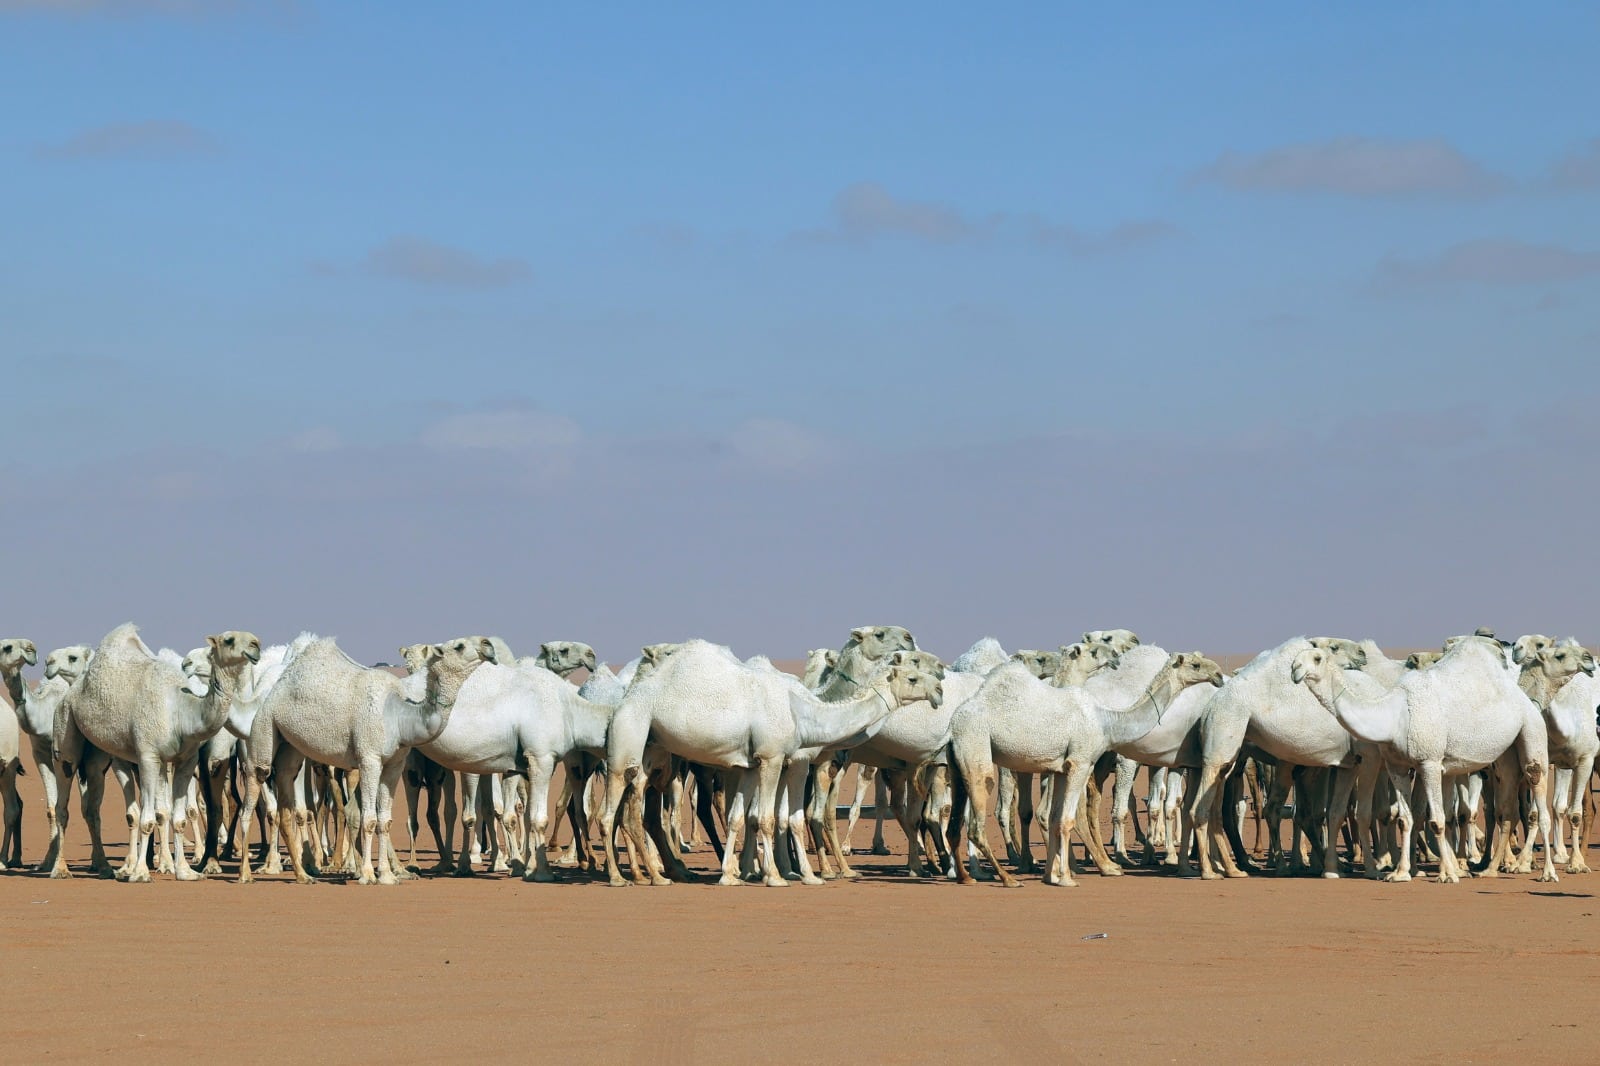 Saudi camel-whisperers use ‘special language’ to train herd